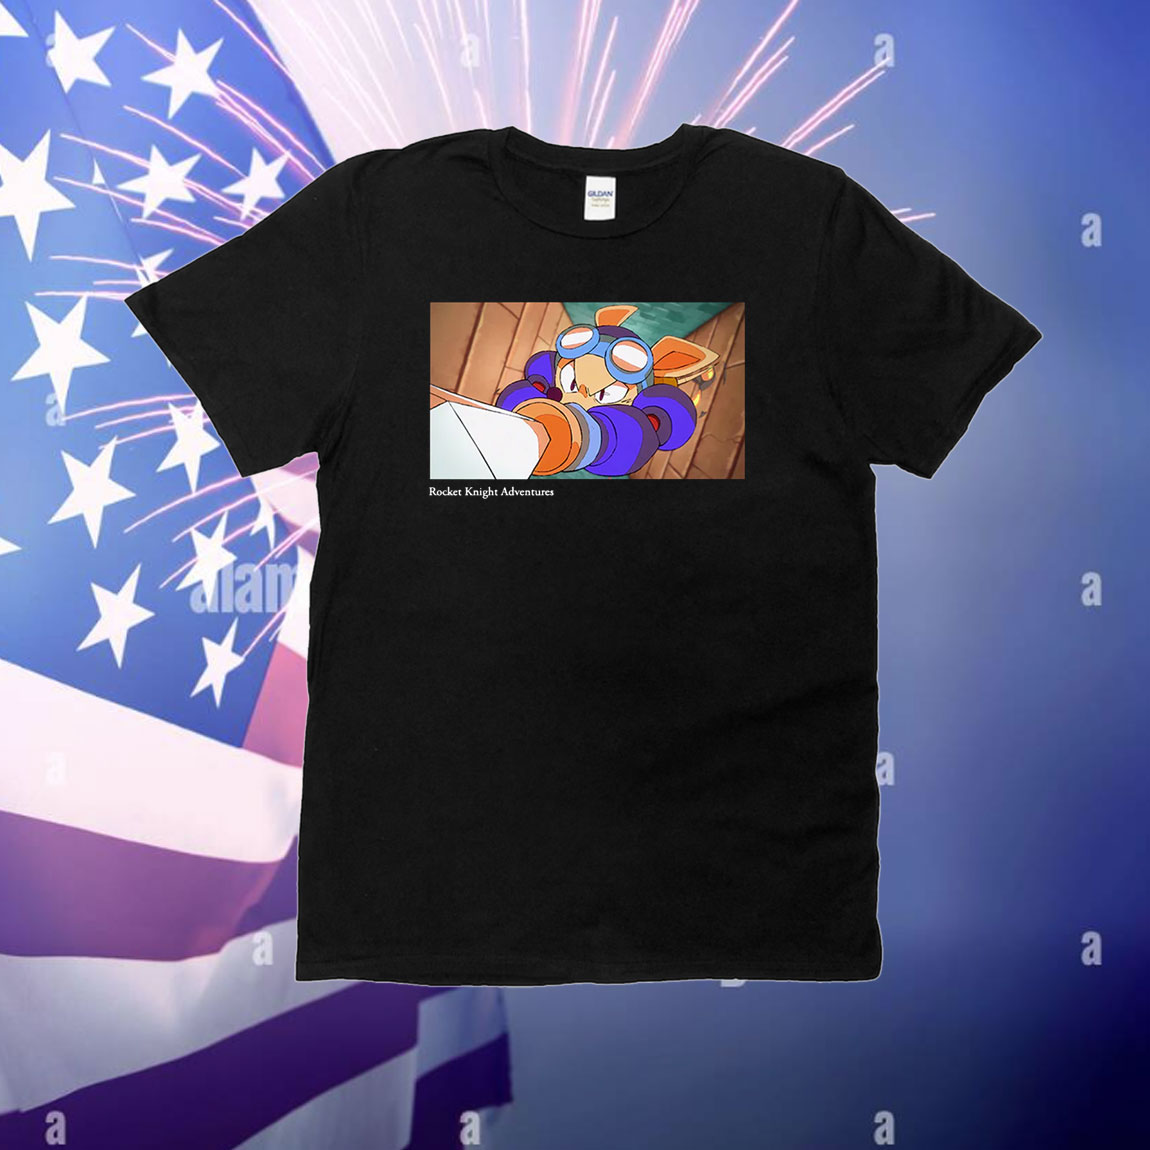 Re-Sparked Animation T-Shirt